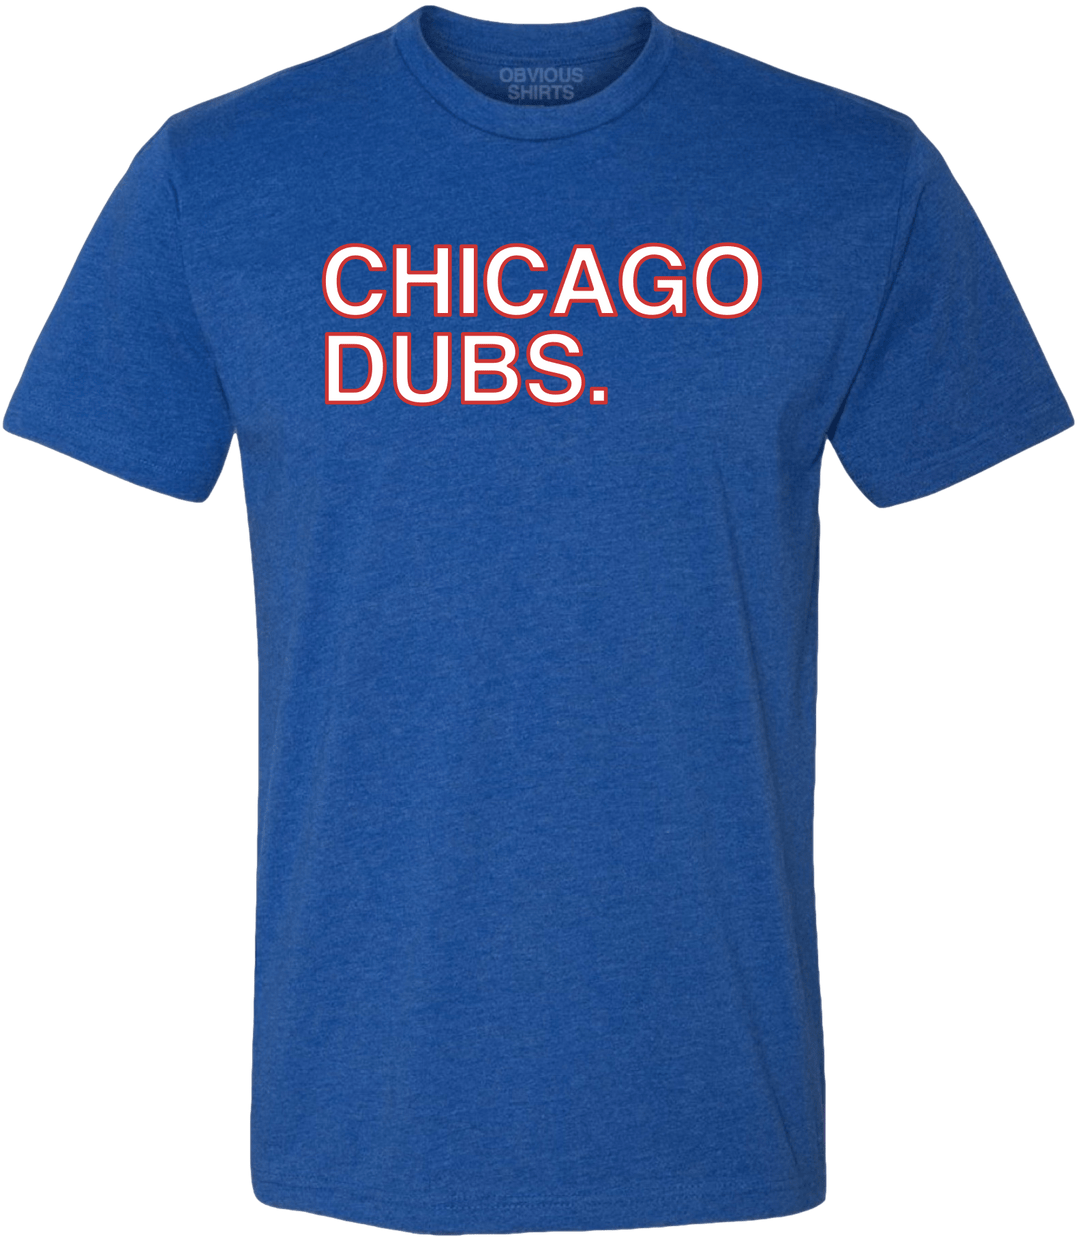 CHICAGO DUBS. (2-COLOR) - OBVIOUS SHIRTS